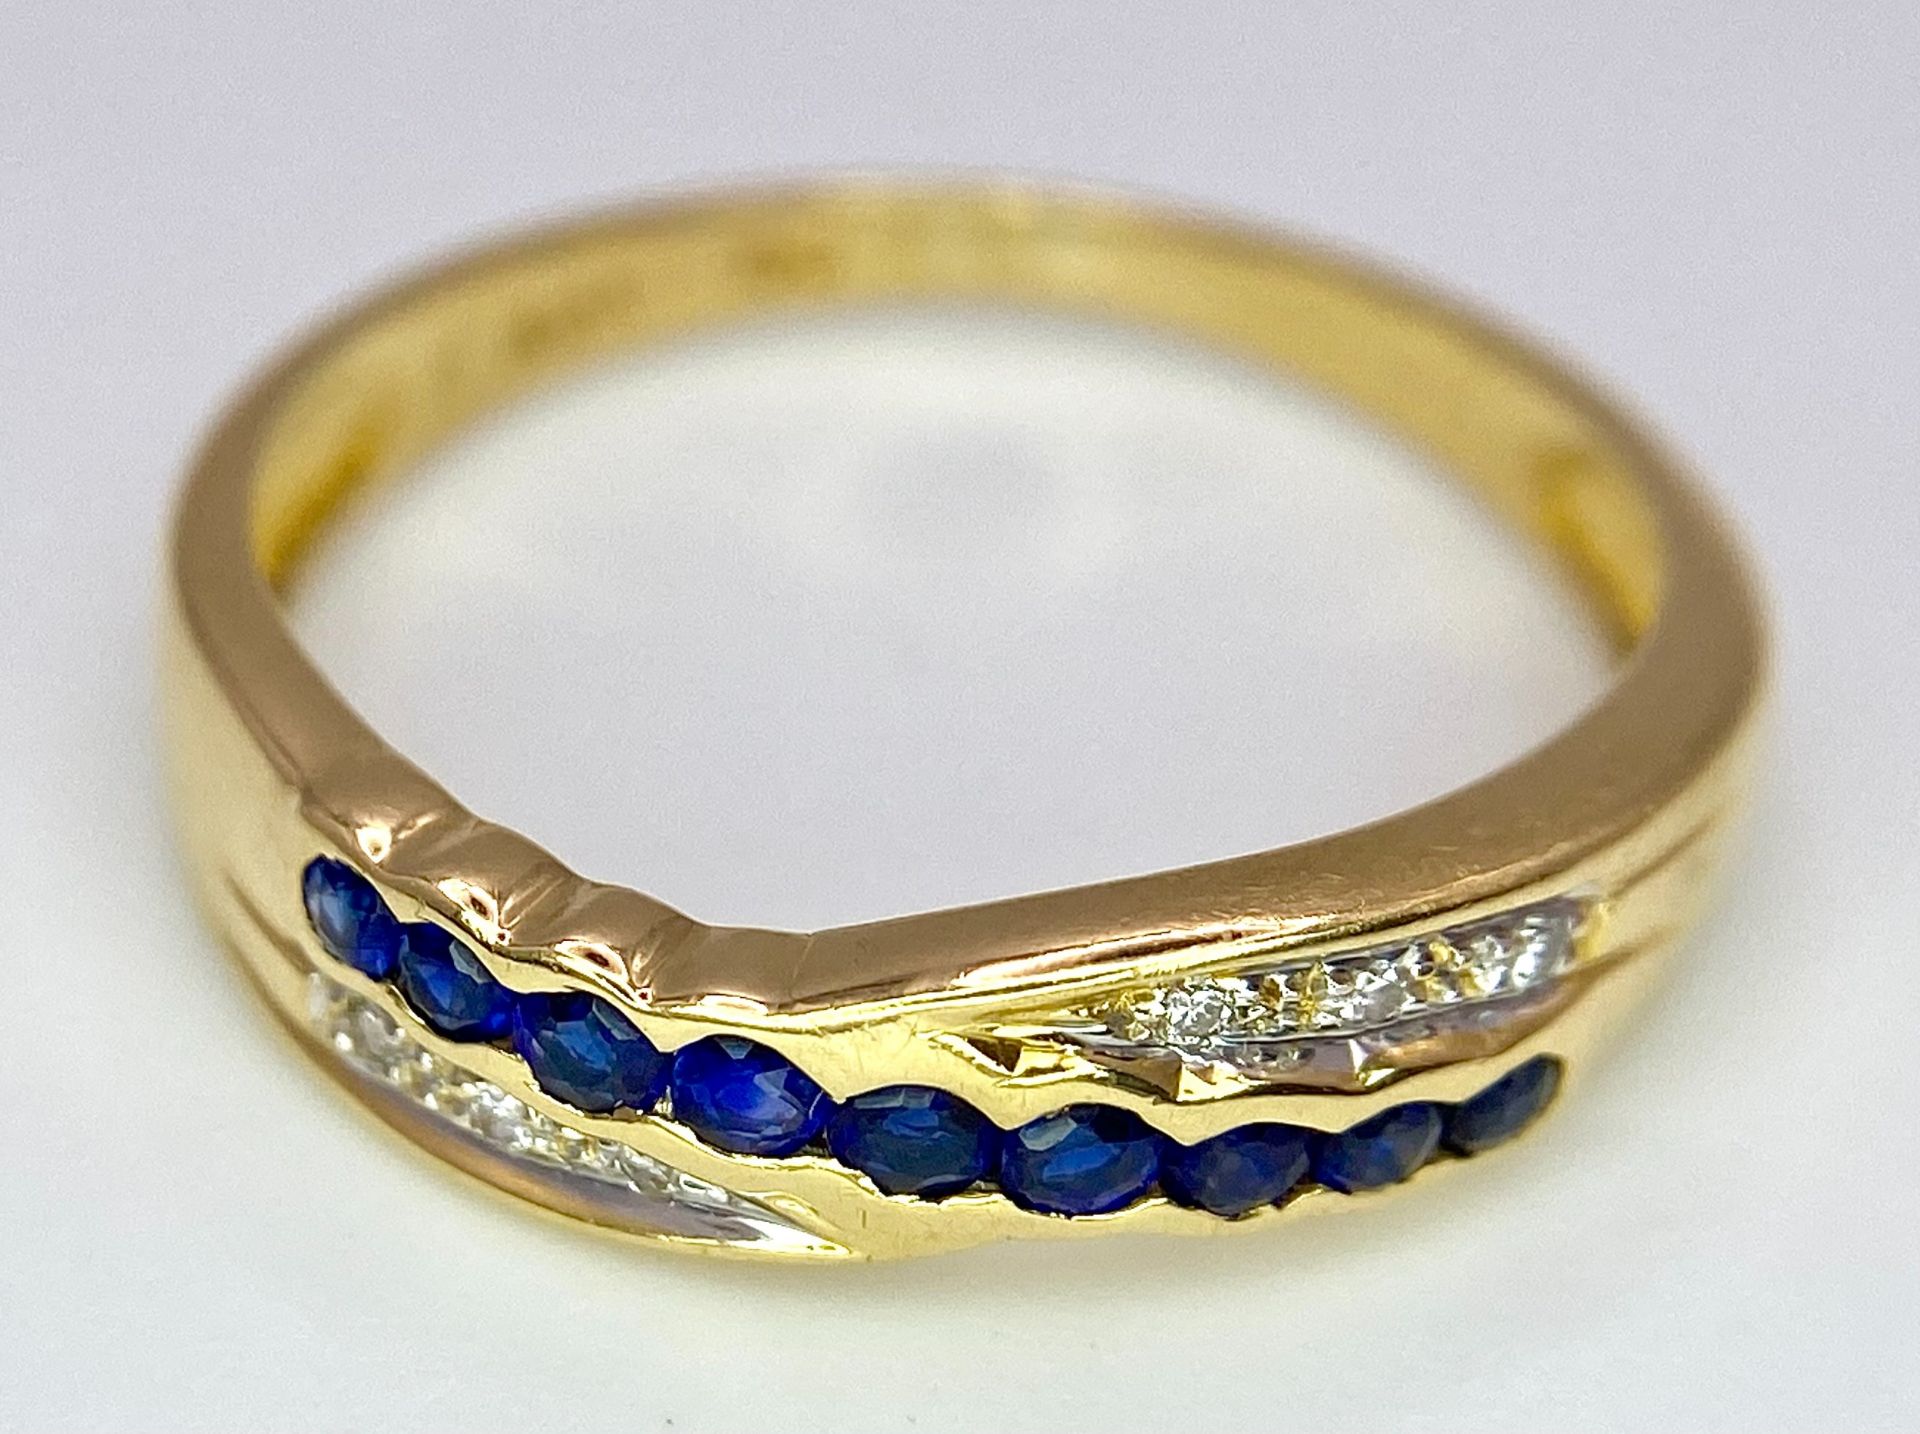 AN 18K YELLOW GOLD DIAMOND & BLUE STONE (PROBABLY SAPPHIRE) CROSSOVER RING. Size O, 2.7g total - Image 3 of 6